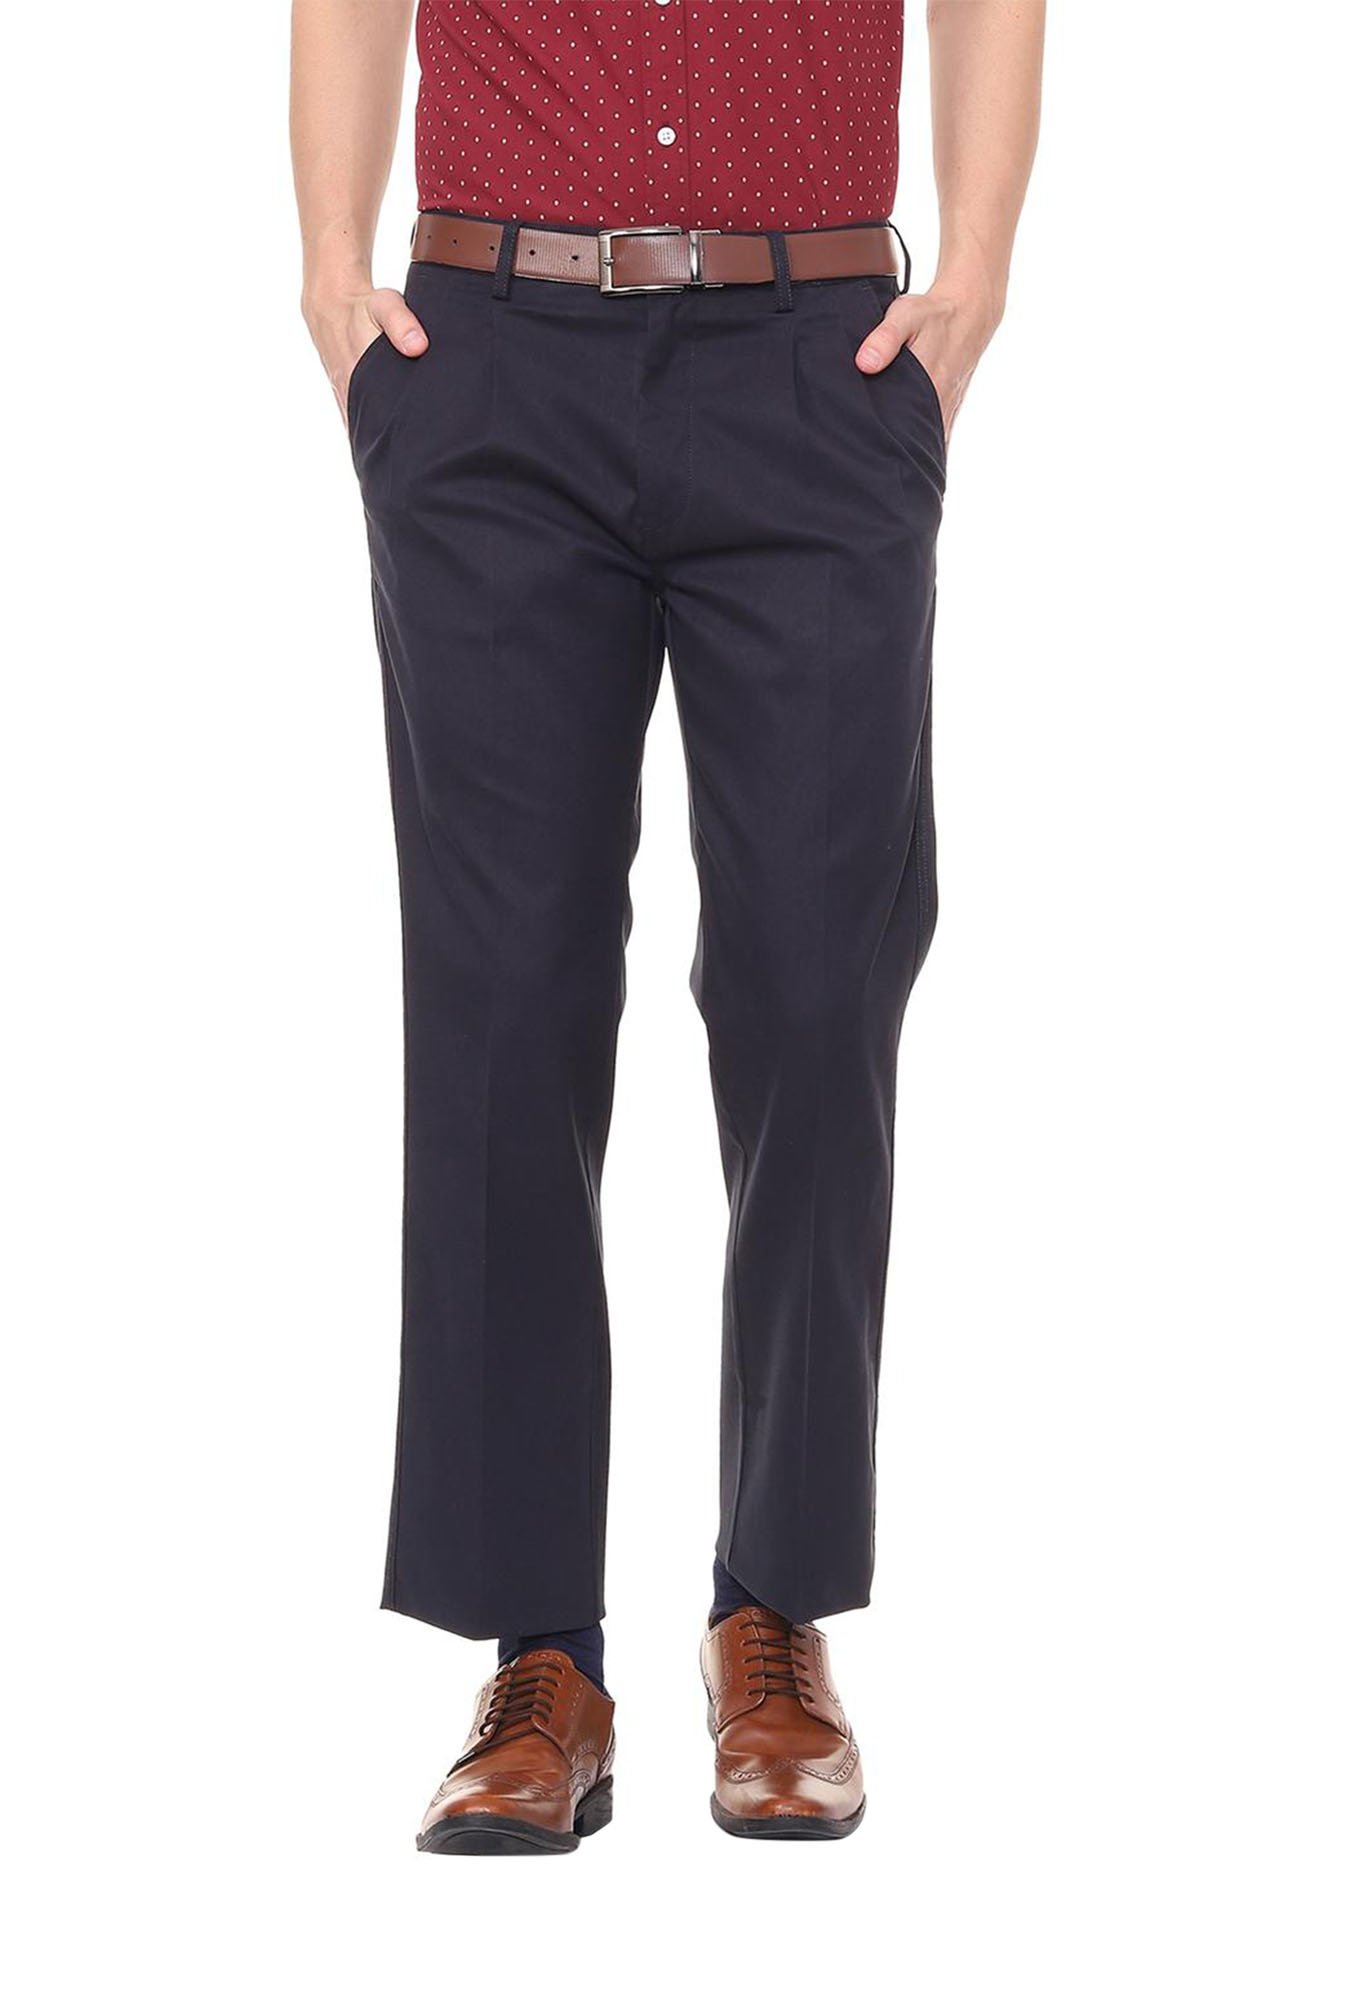 Poly Viscose Men Formal Trouser Pleated Trousers